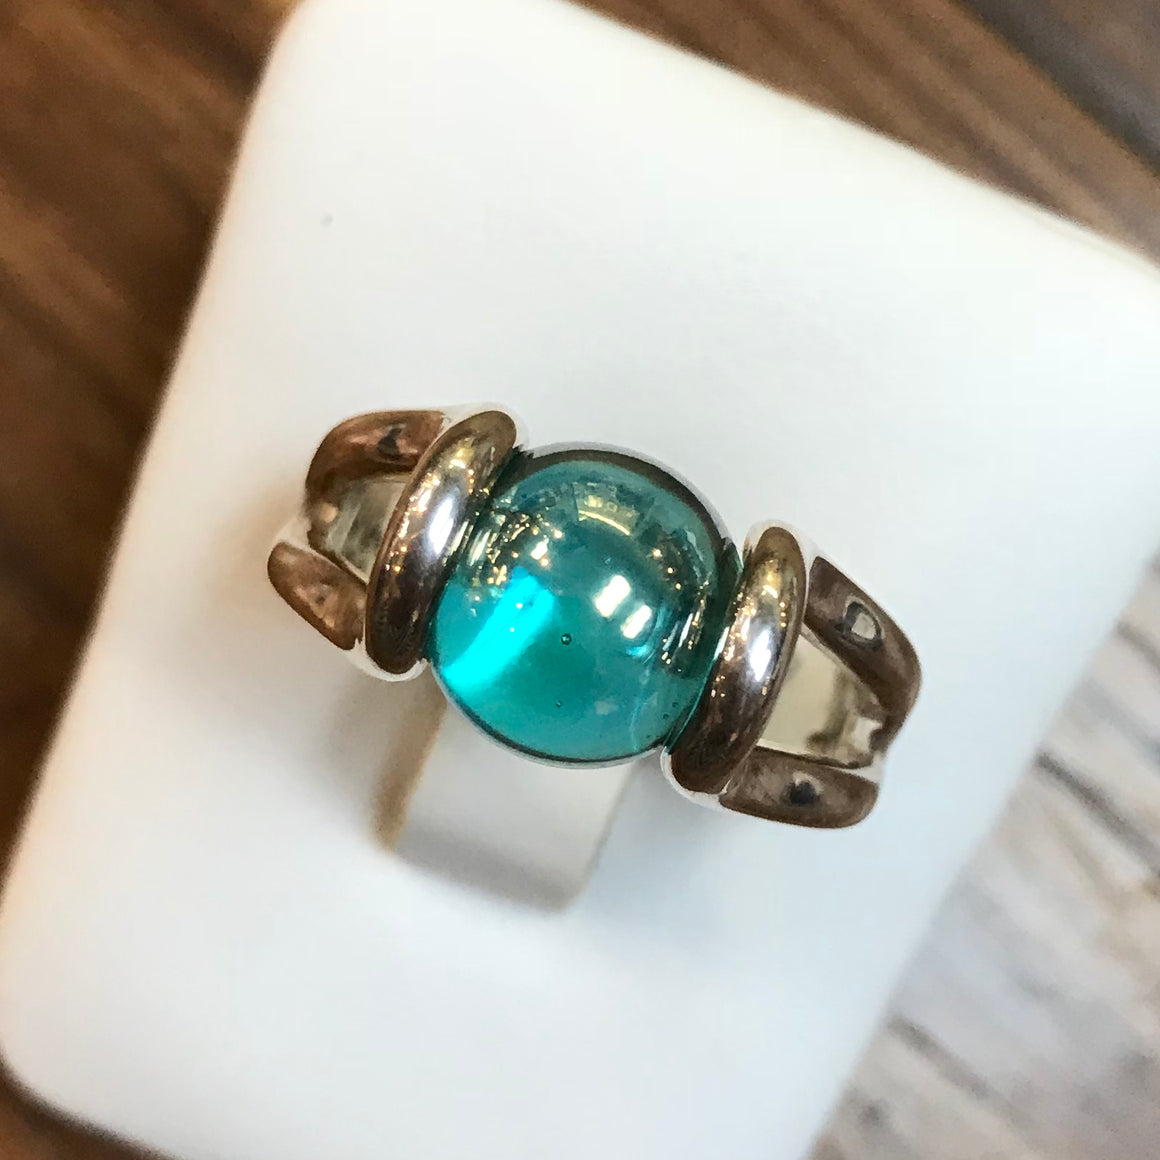 Marble POP Joy Ring - Got All Your Marbles?